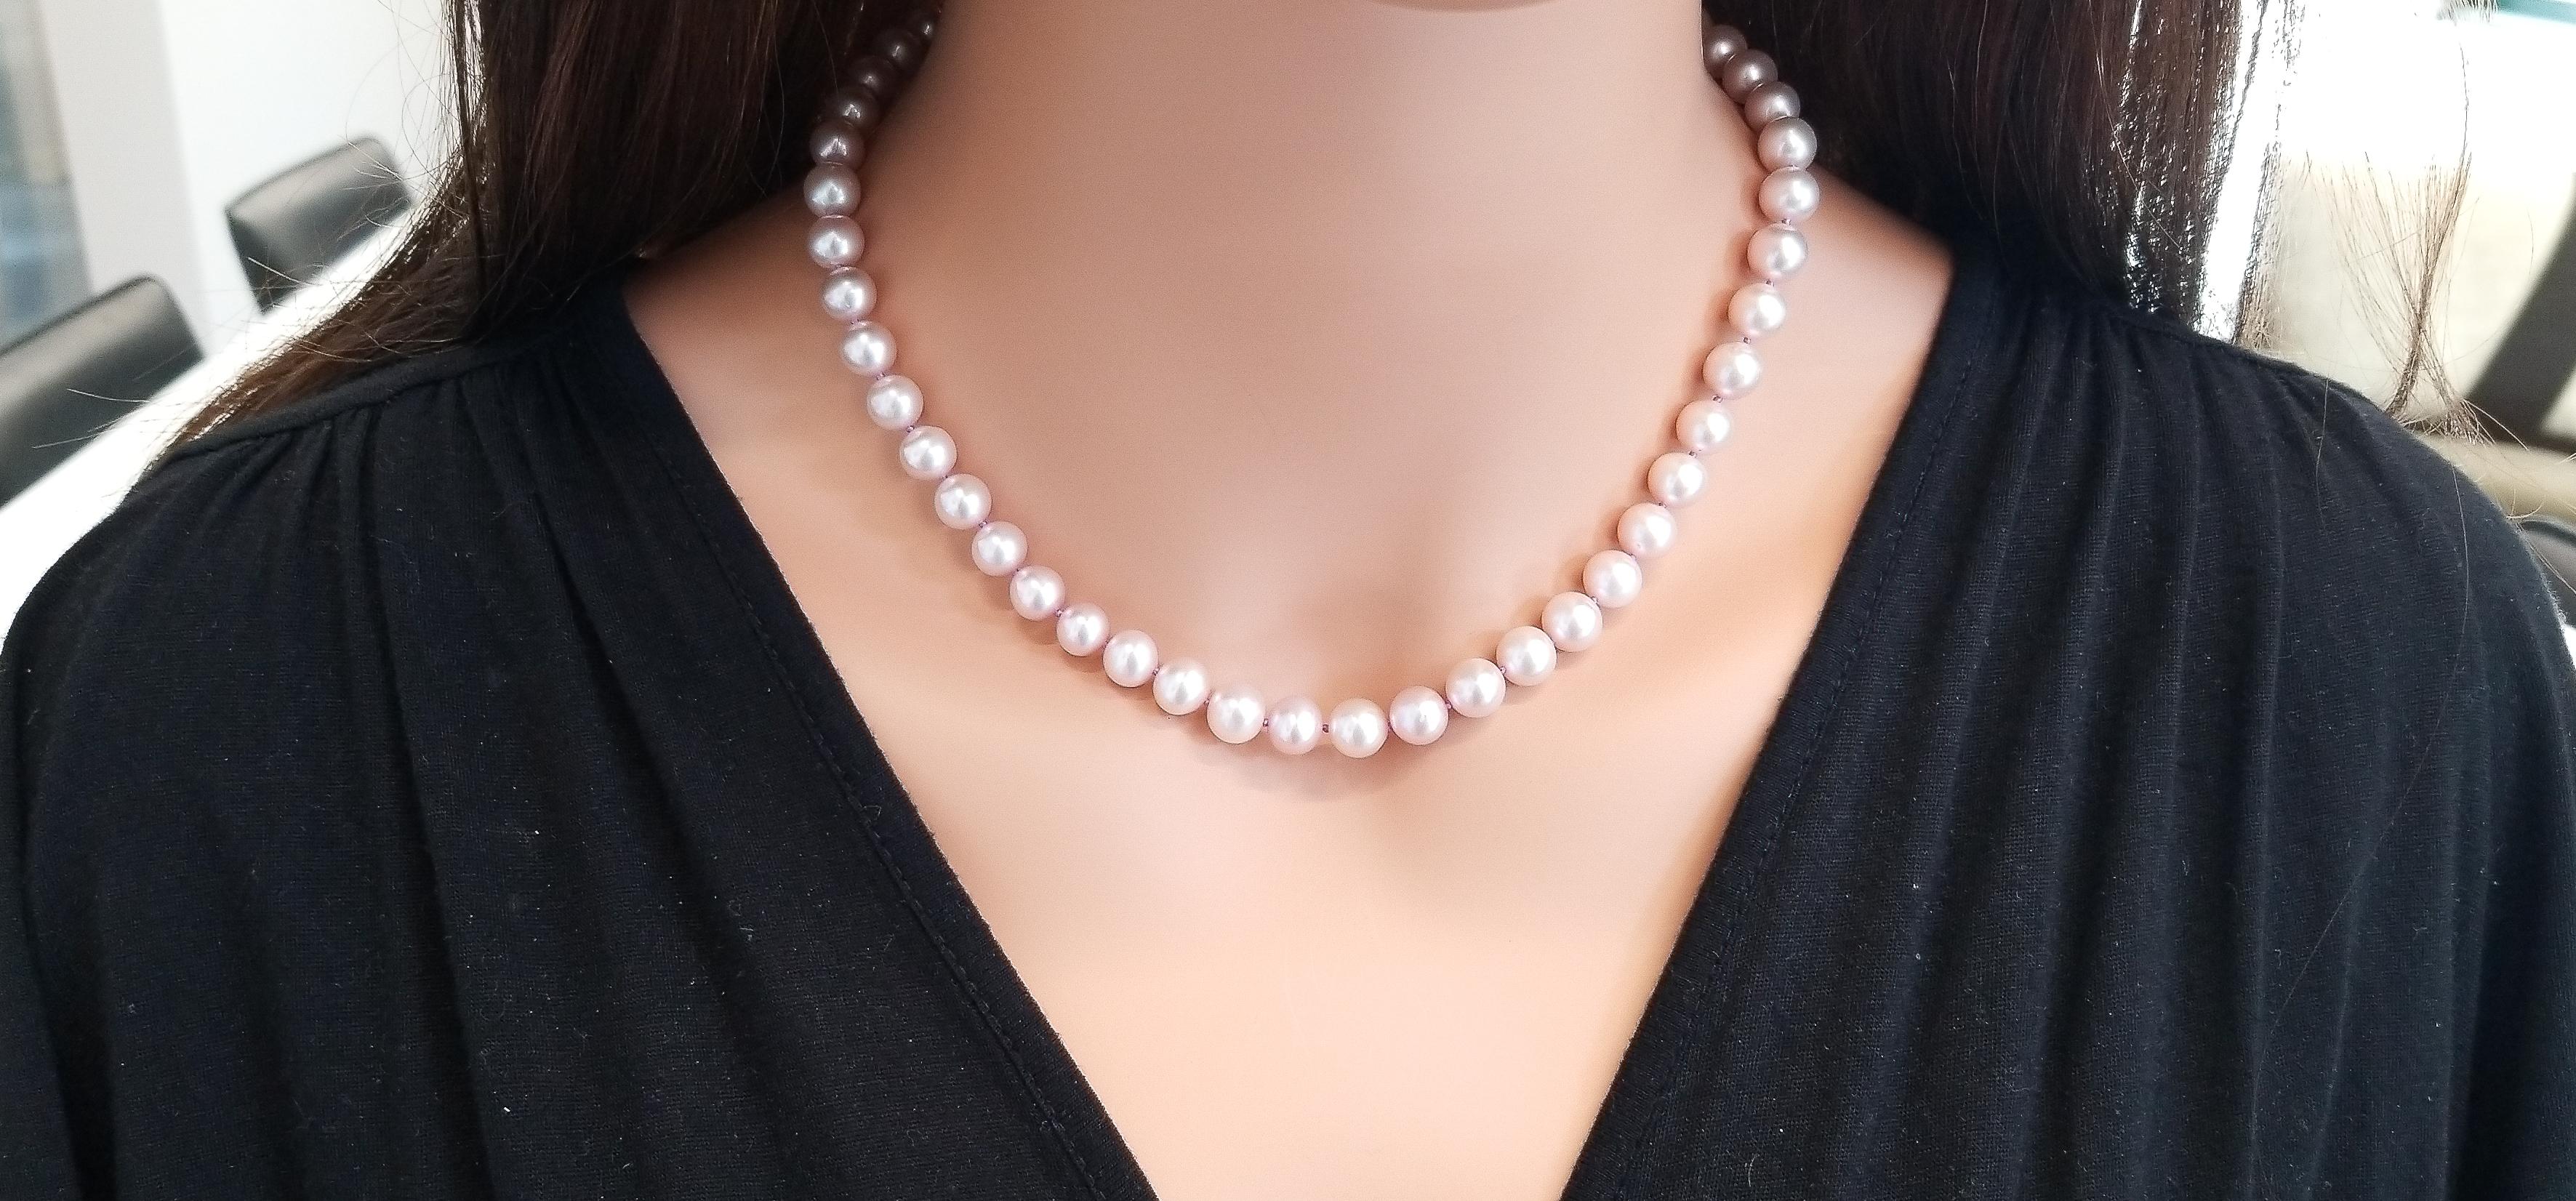 Every stylish lady needs an elegant strand of pearls! If you are looking for a piece that will be worn and enjoy for any and all occasions, then this is the one. This striking feminine necklace features gorgeous 8-millimeter lavender pearls set